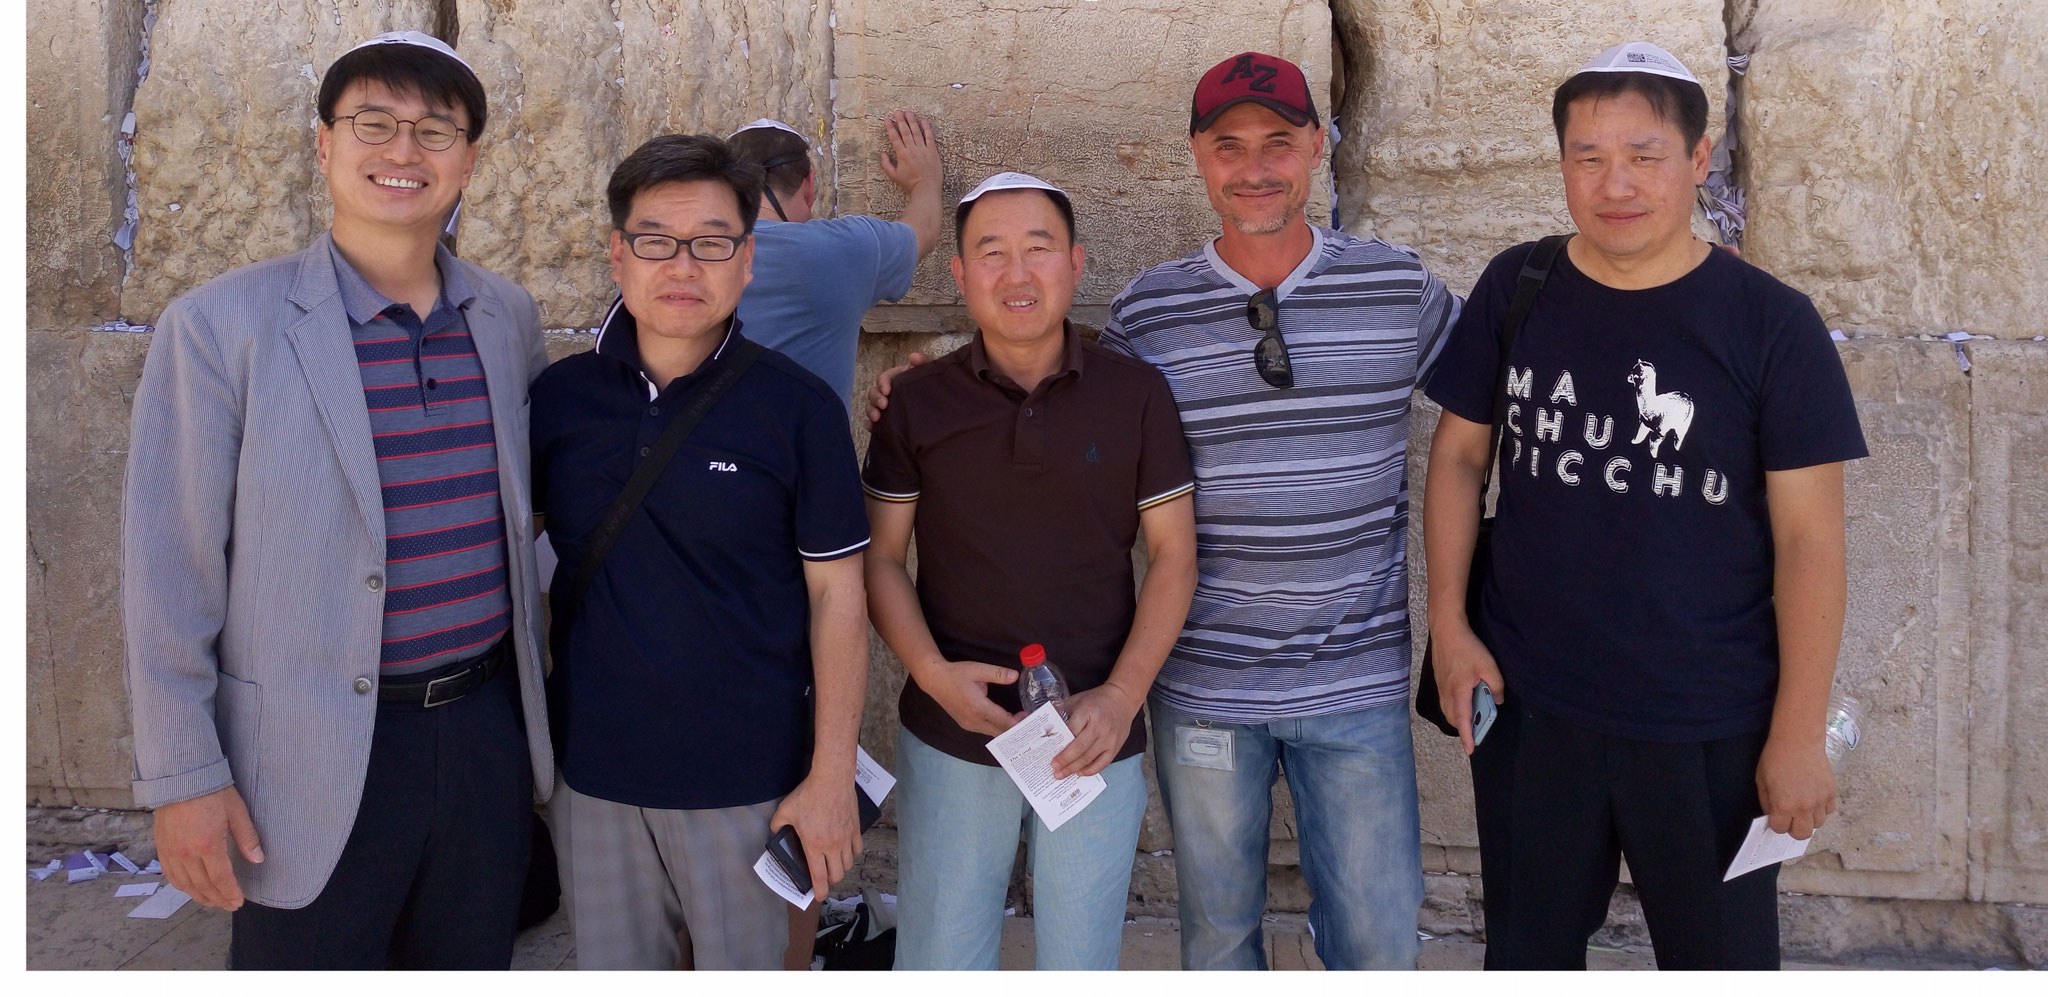 With South Korean tourists at the Western Wall, 2017